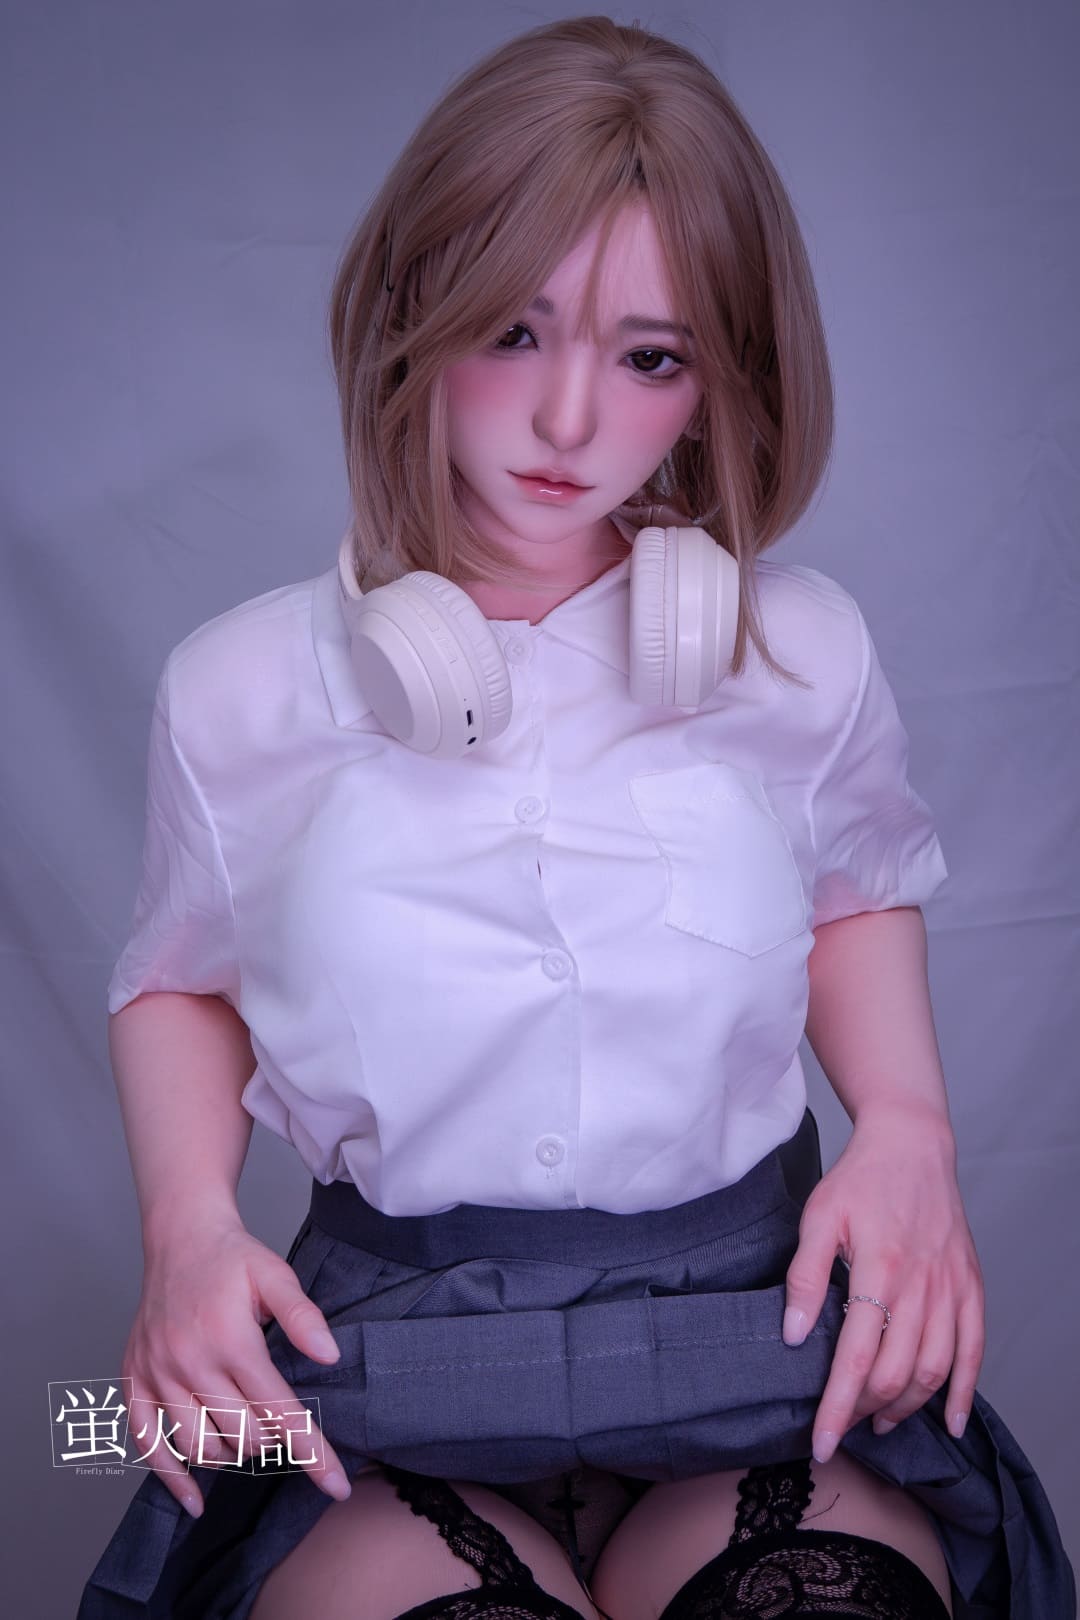 4ft11 / 151cm Cute Face Silicone Japanese Sex Doll - Firefly Diary Doll Zephyr